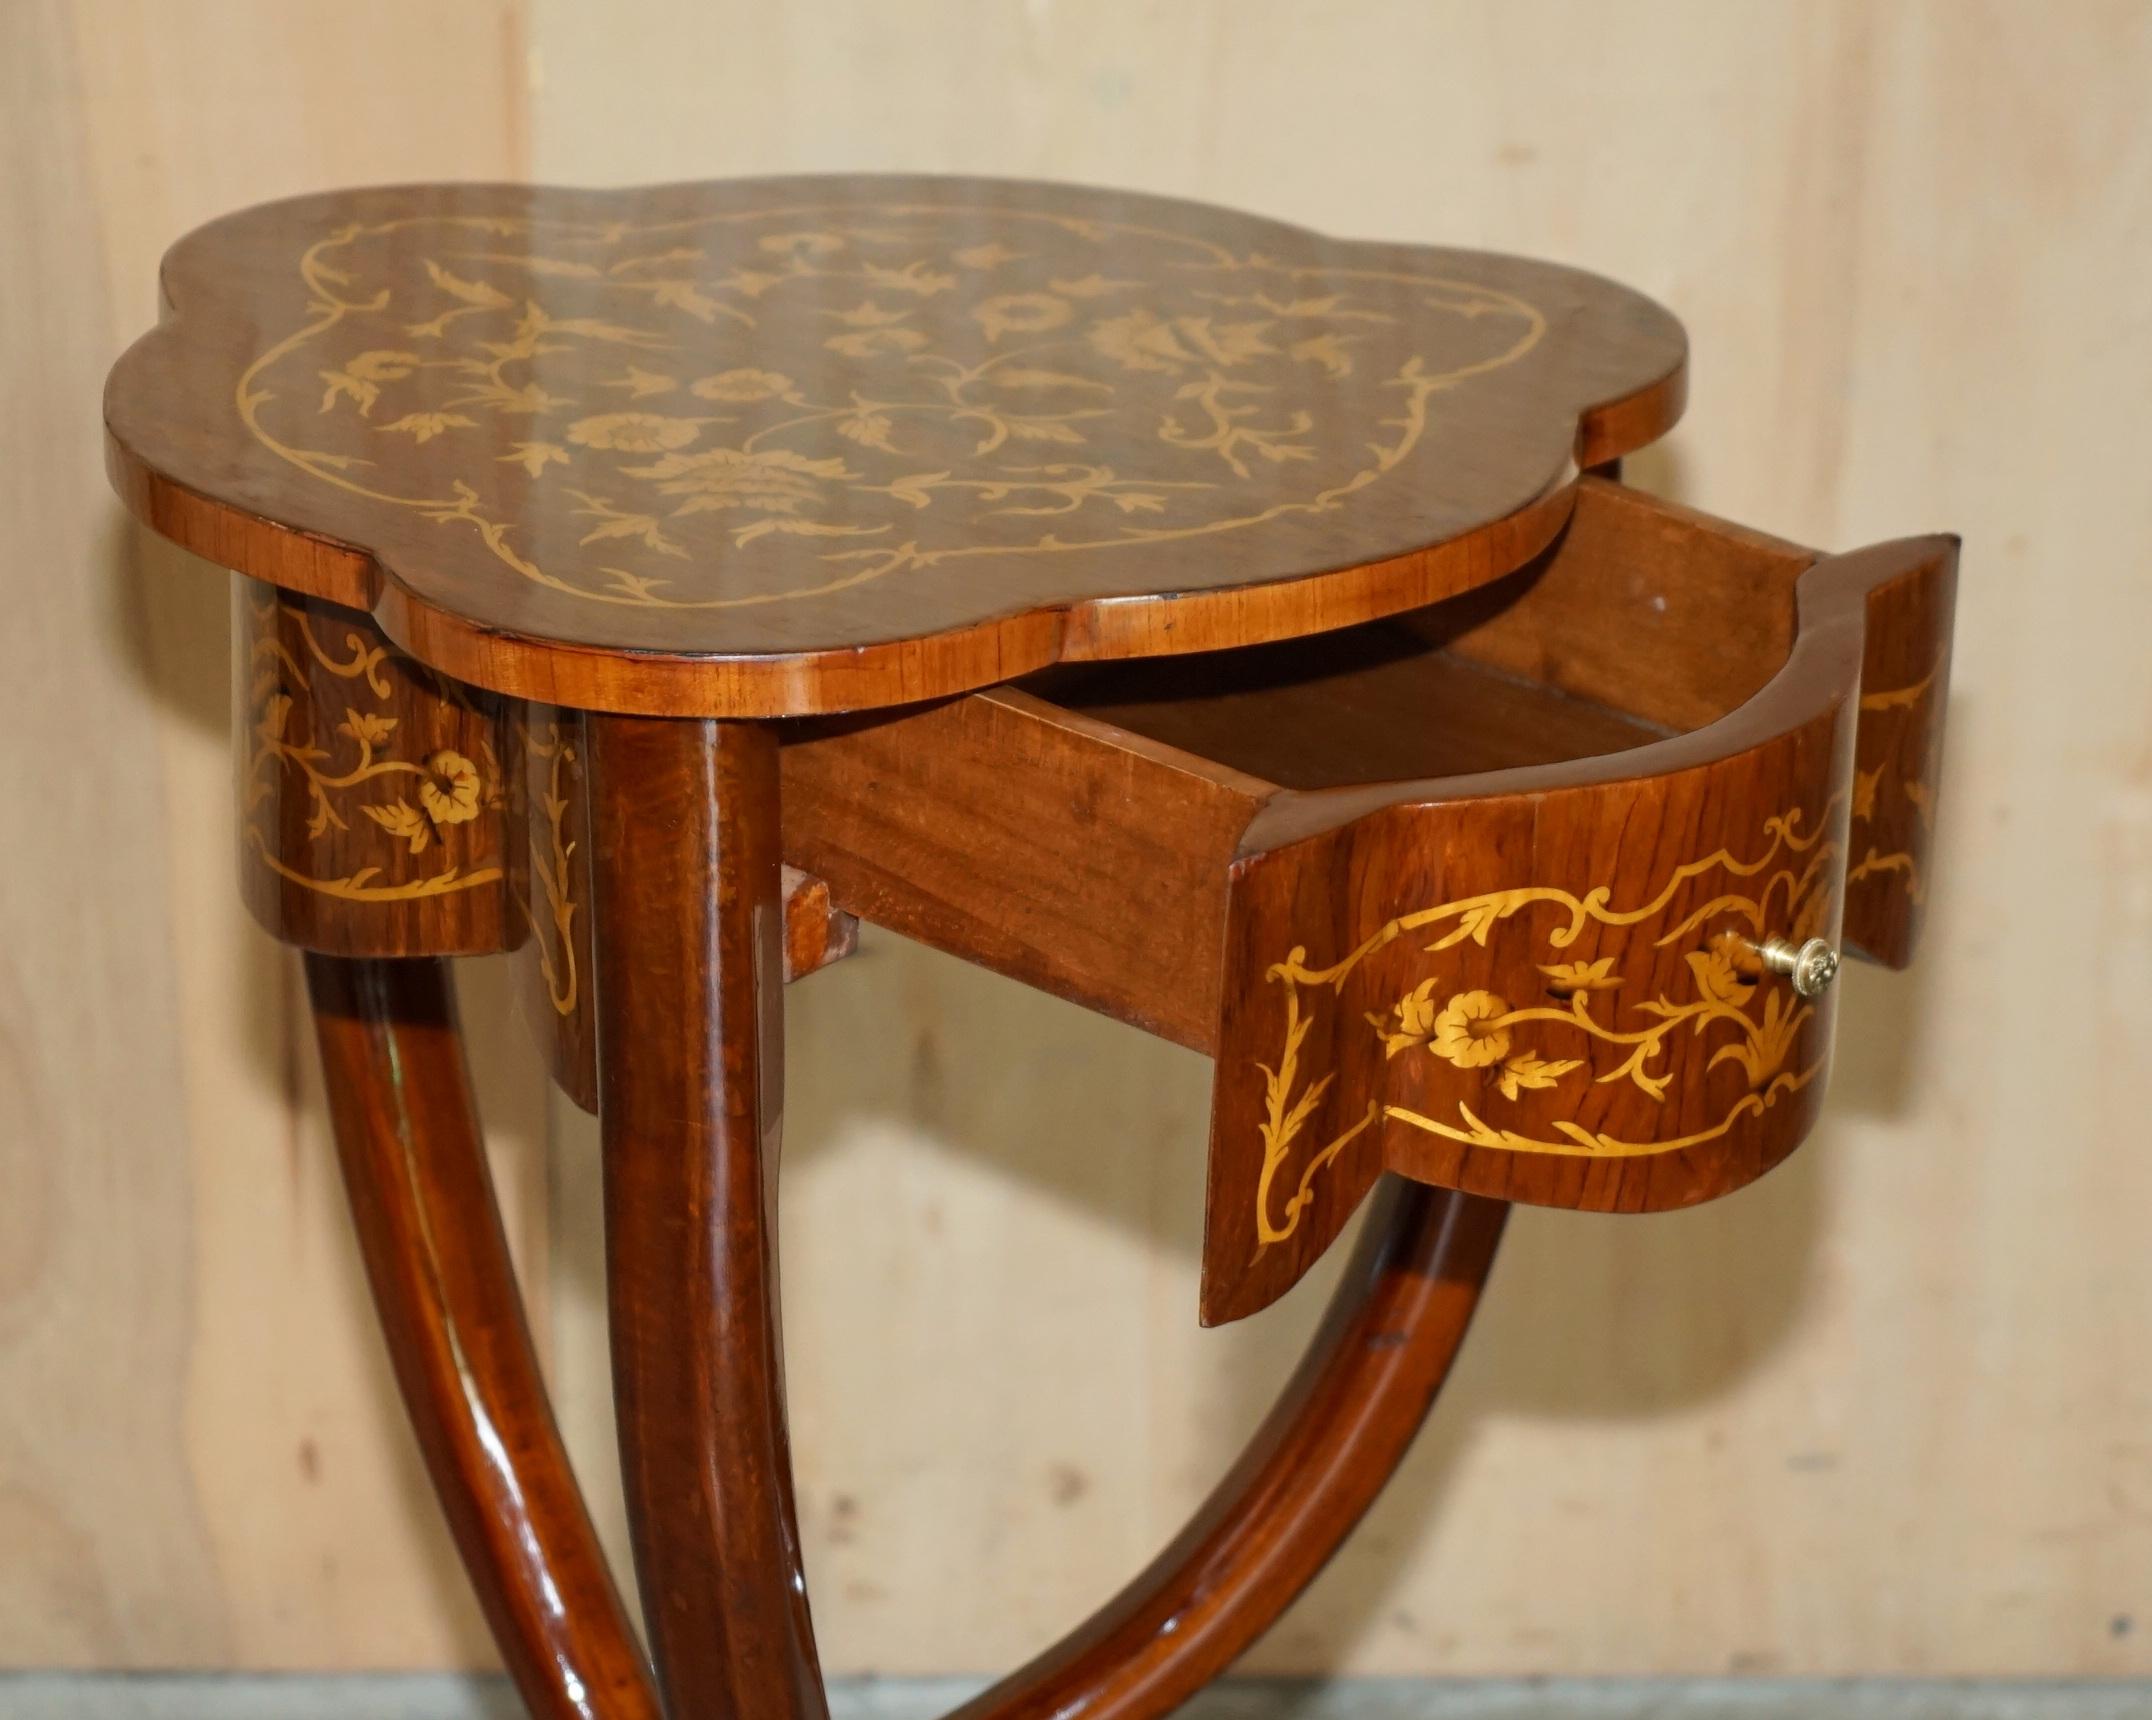 PAIR OF ART DECO STYLE SYCAMORE WOOD & WALNUT INLAID PEDESTAL SIDE END TABLEs For Sale 8